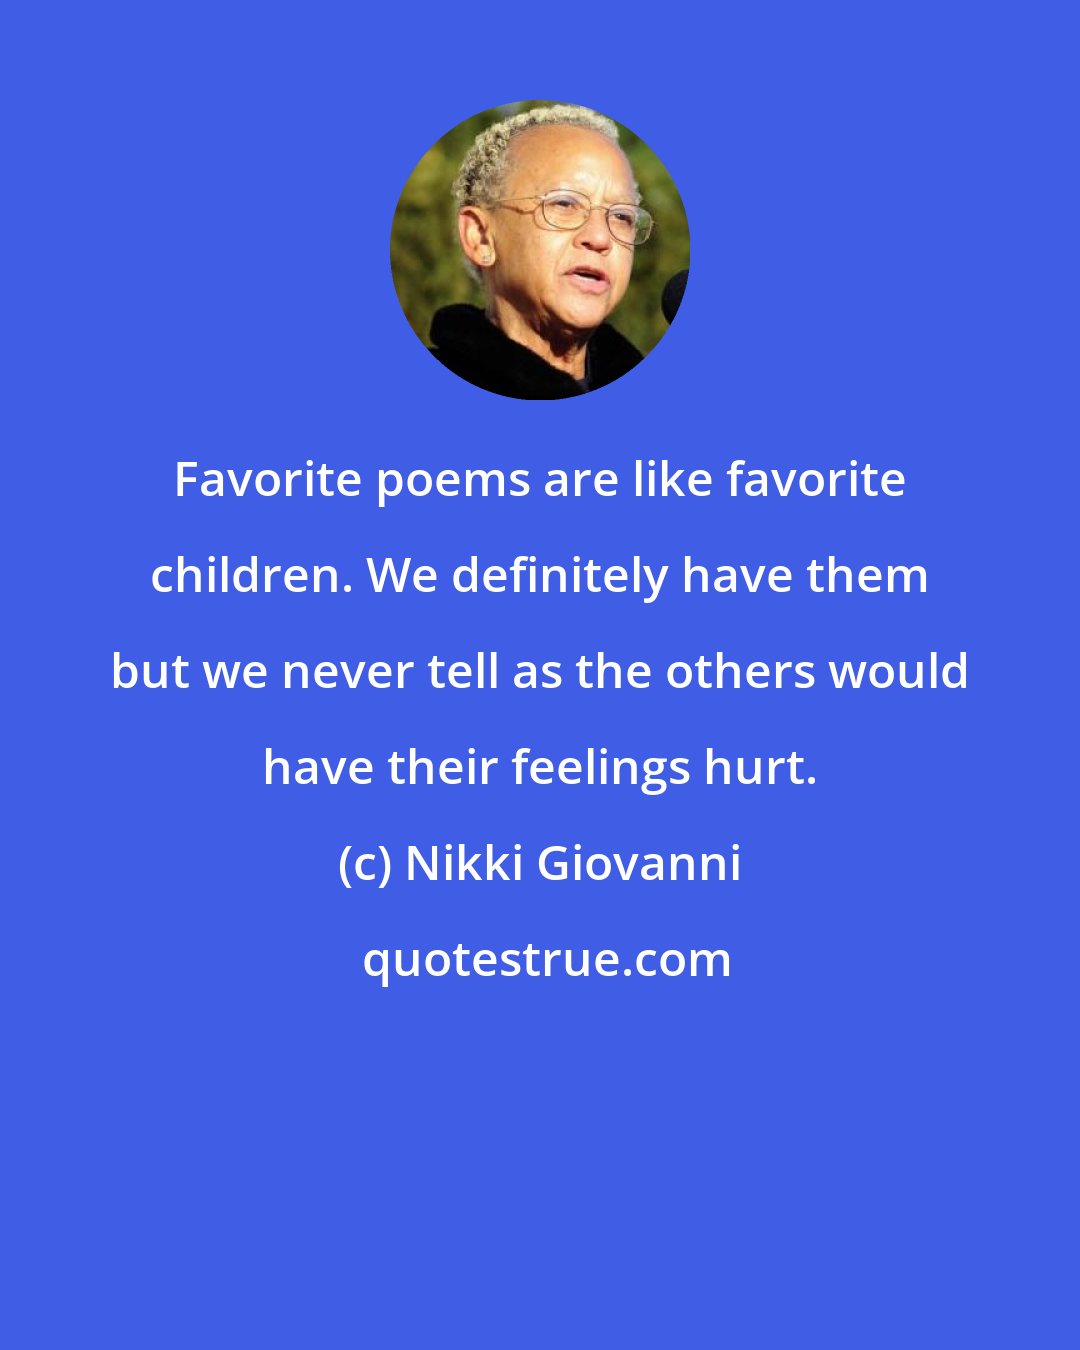 Nikki Giovanni: Favorite poems are like favorite children. We definitely have them but we never tell as the others would have their feelings hurt.